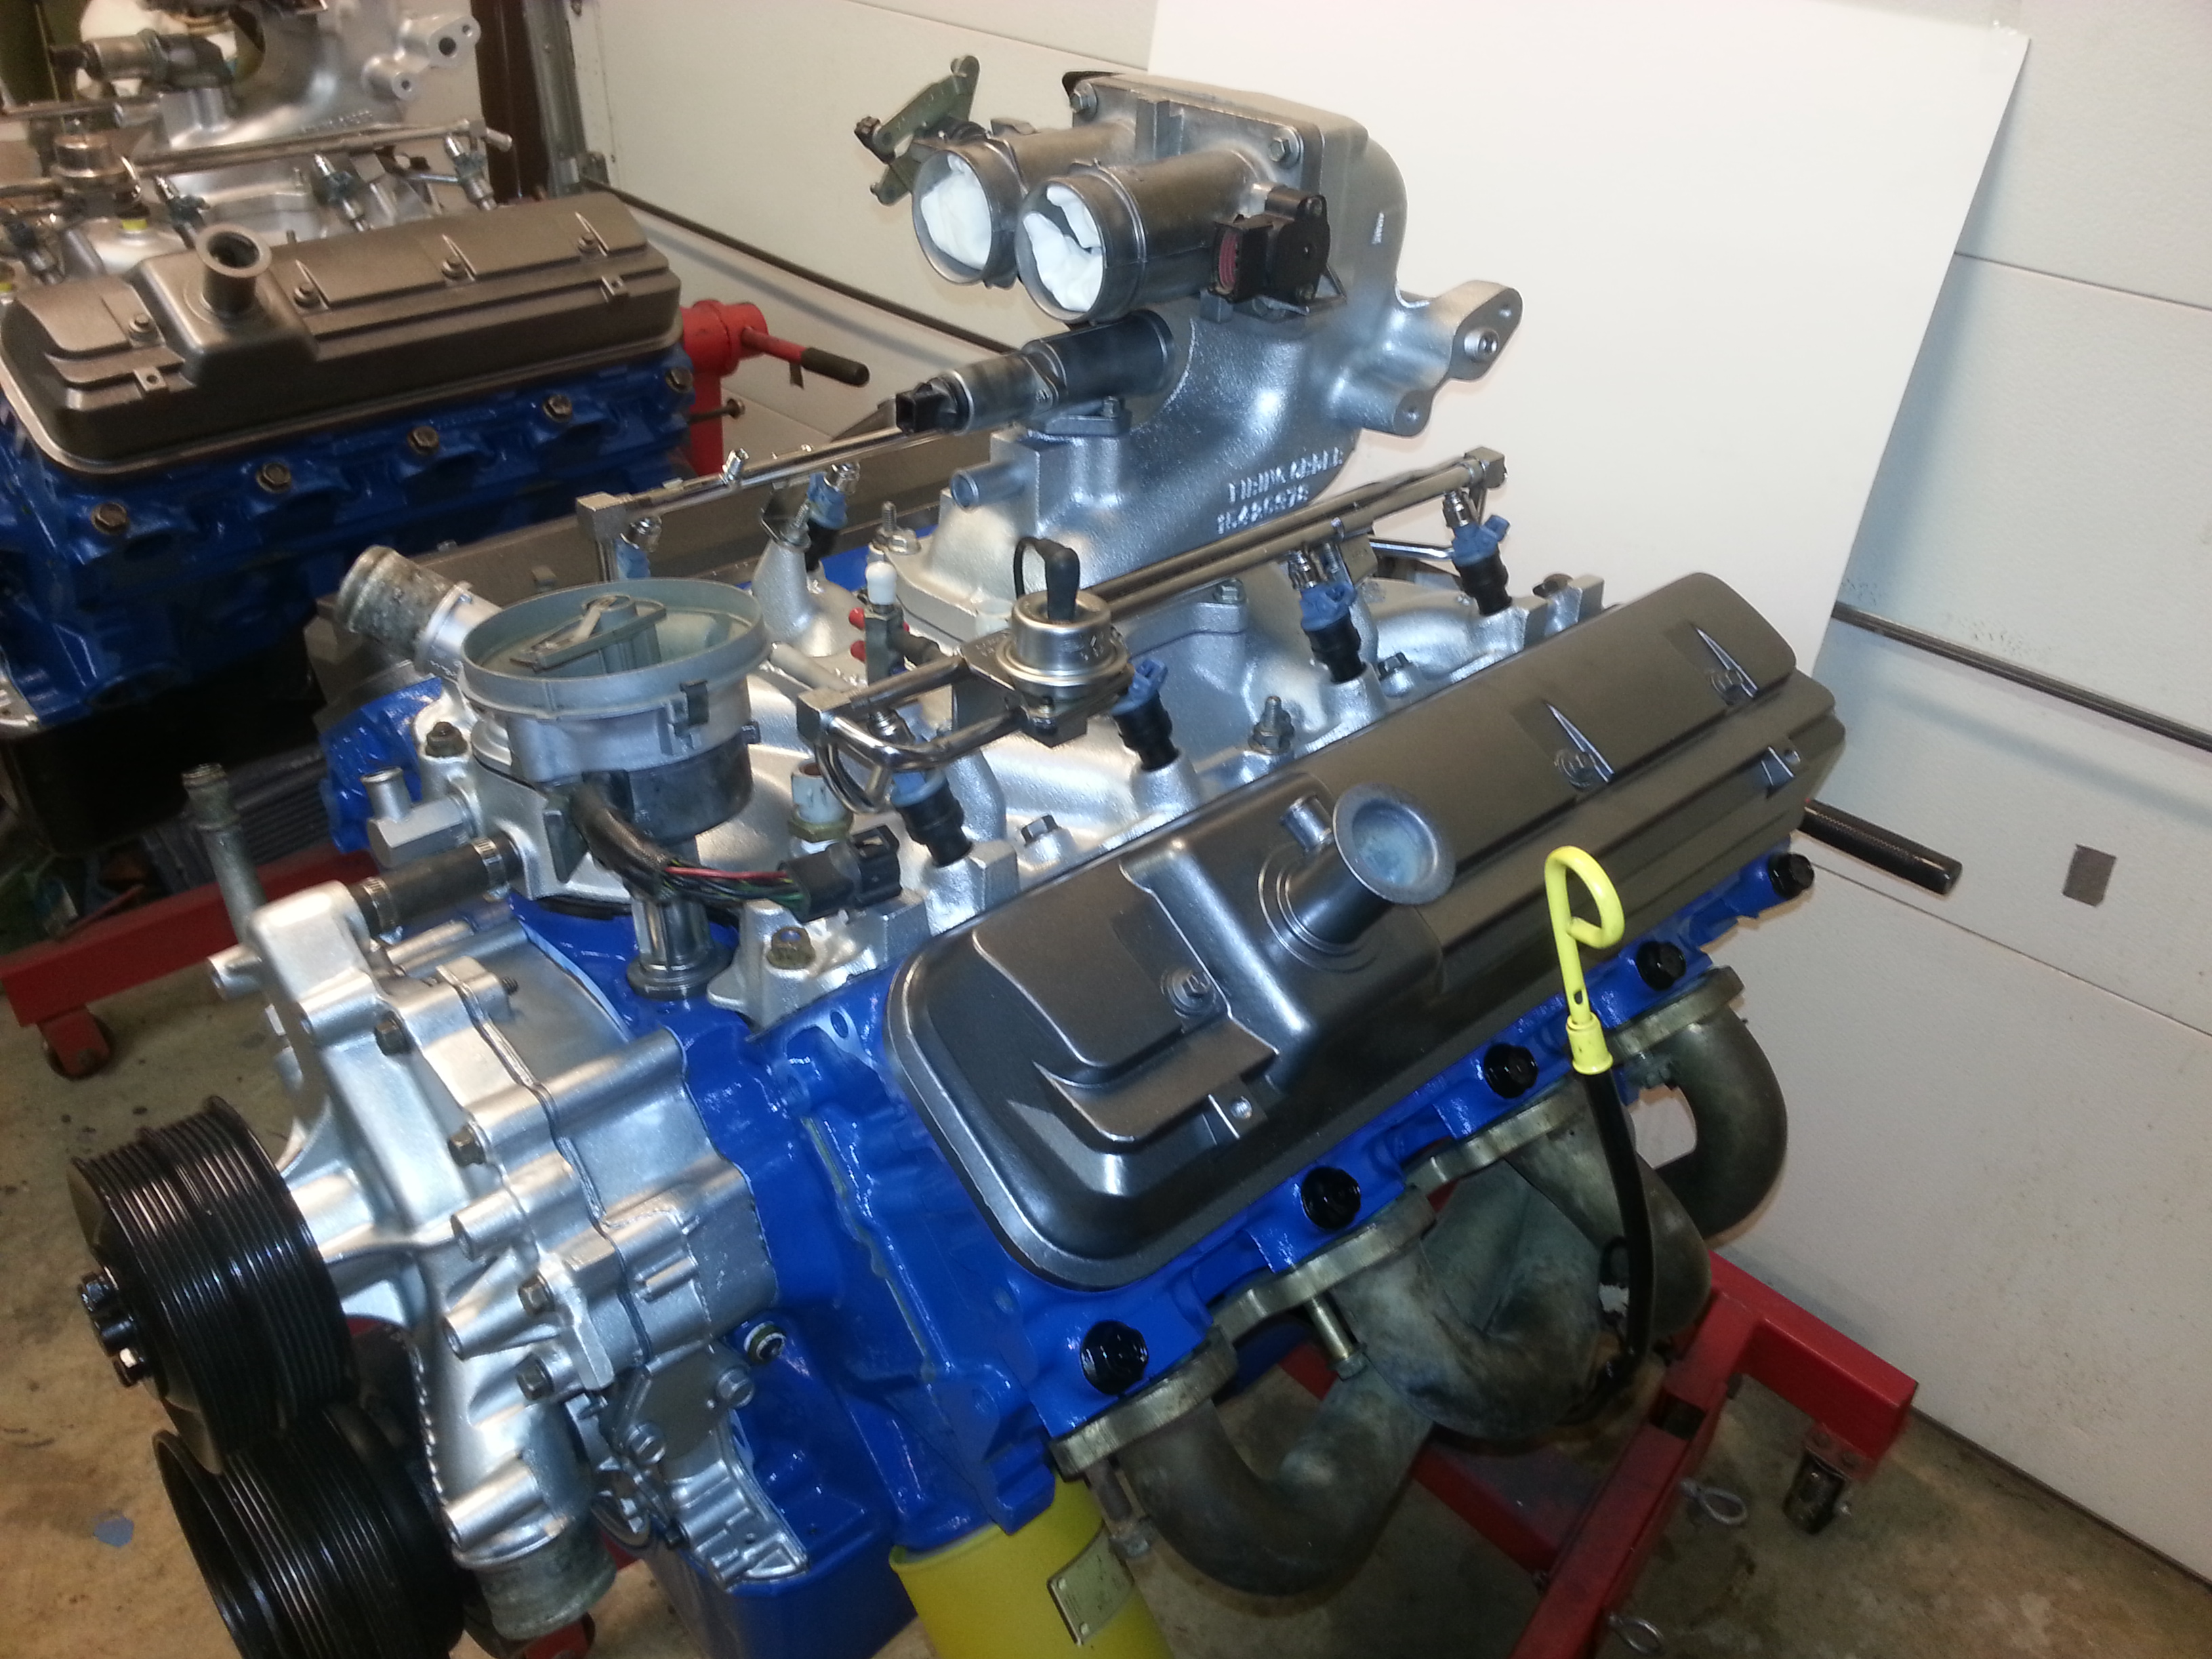 Ford big block parts sales and tech worldwide  Edelbrock victor bbf 460  intake ported to scj port size up for sale on